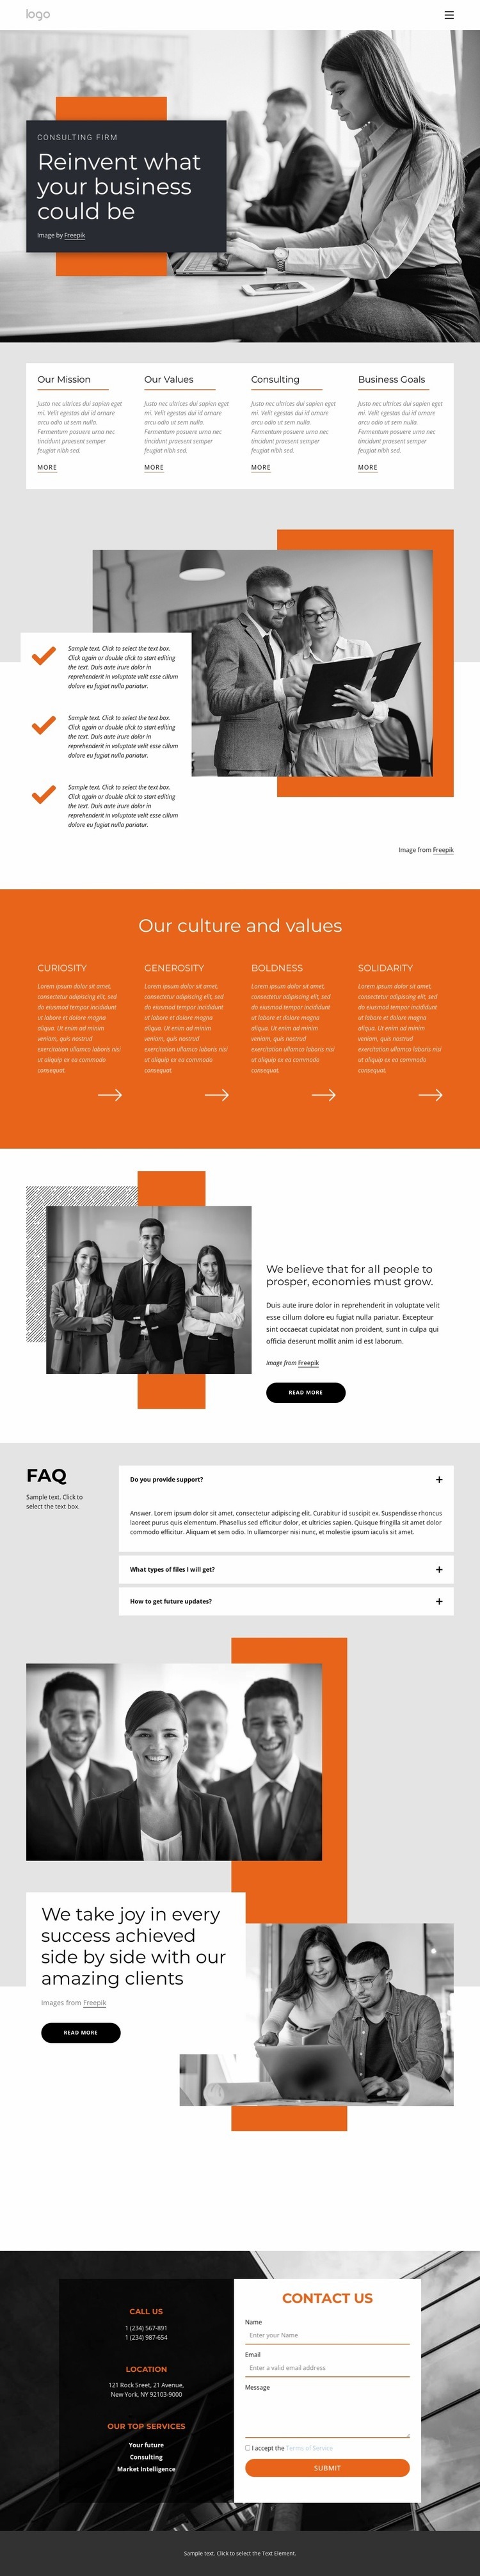 We broke the rules by developing customized strategies Squarespace Template Alternative